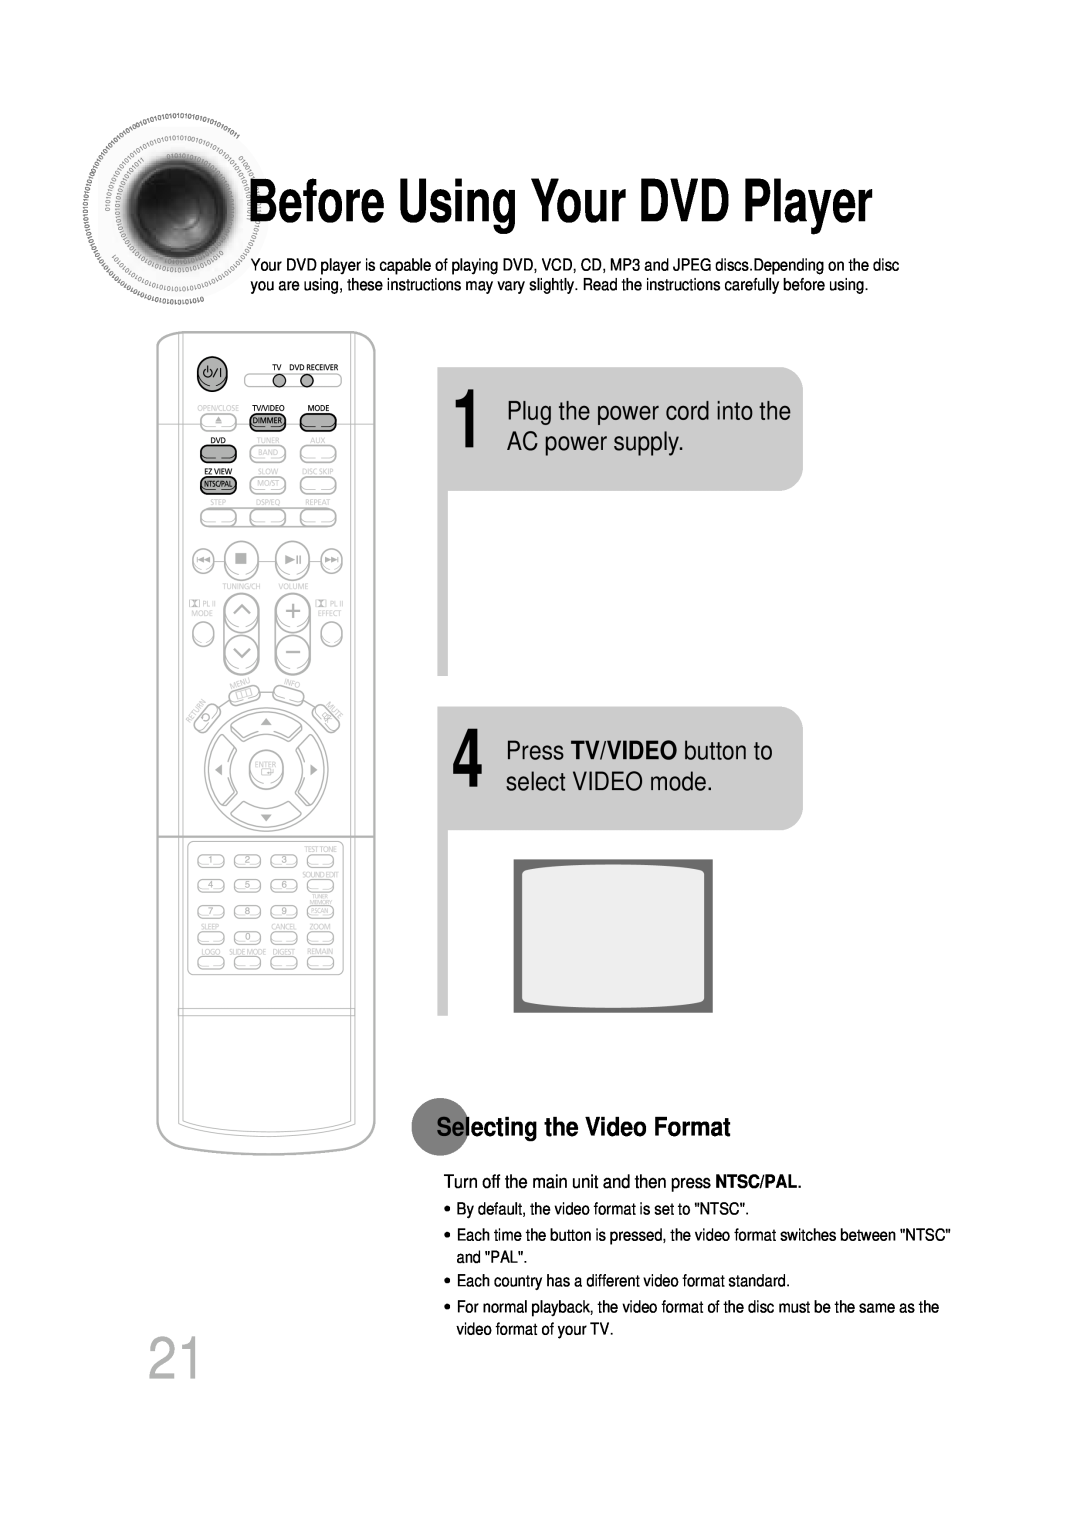 Samsung HT-DB600 Before Using Your DVD Player, Plug the power cord into the AC power supply, Selecting the Video Format 